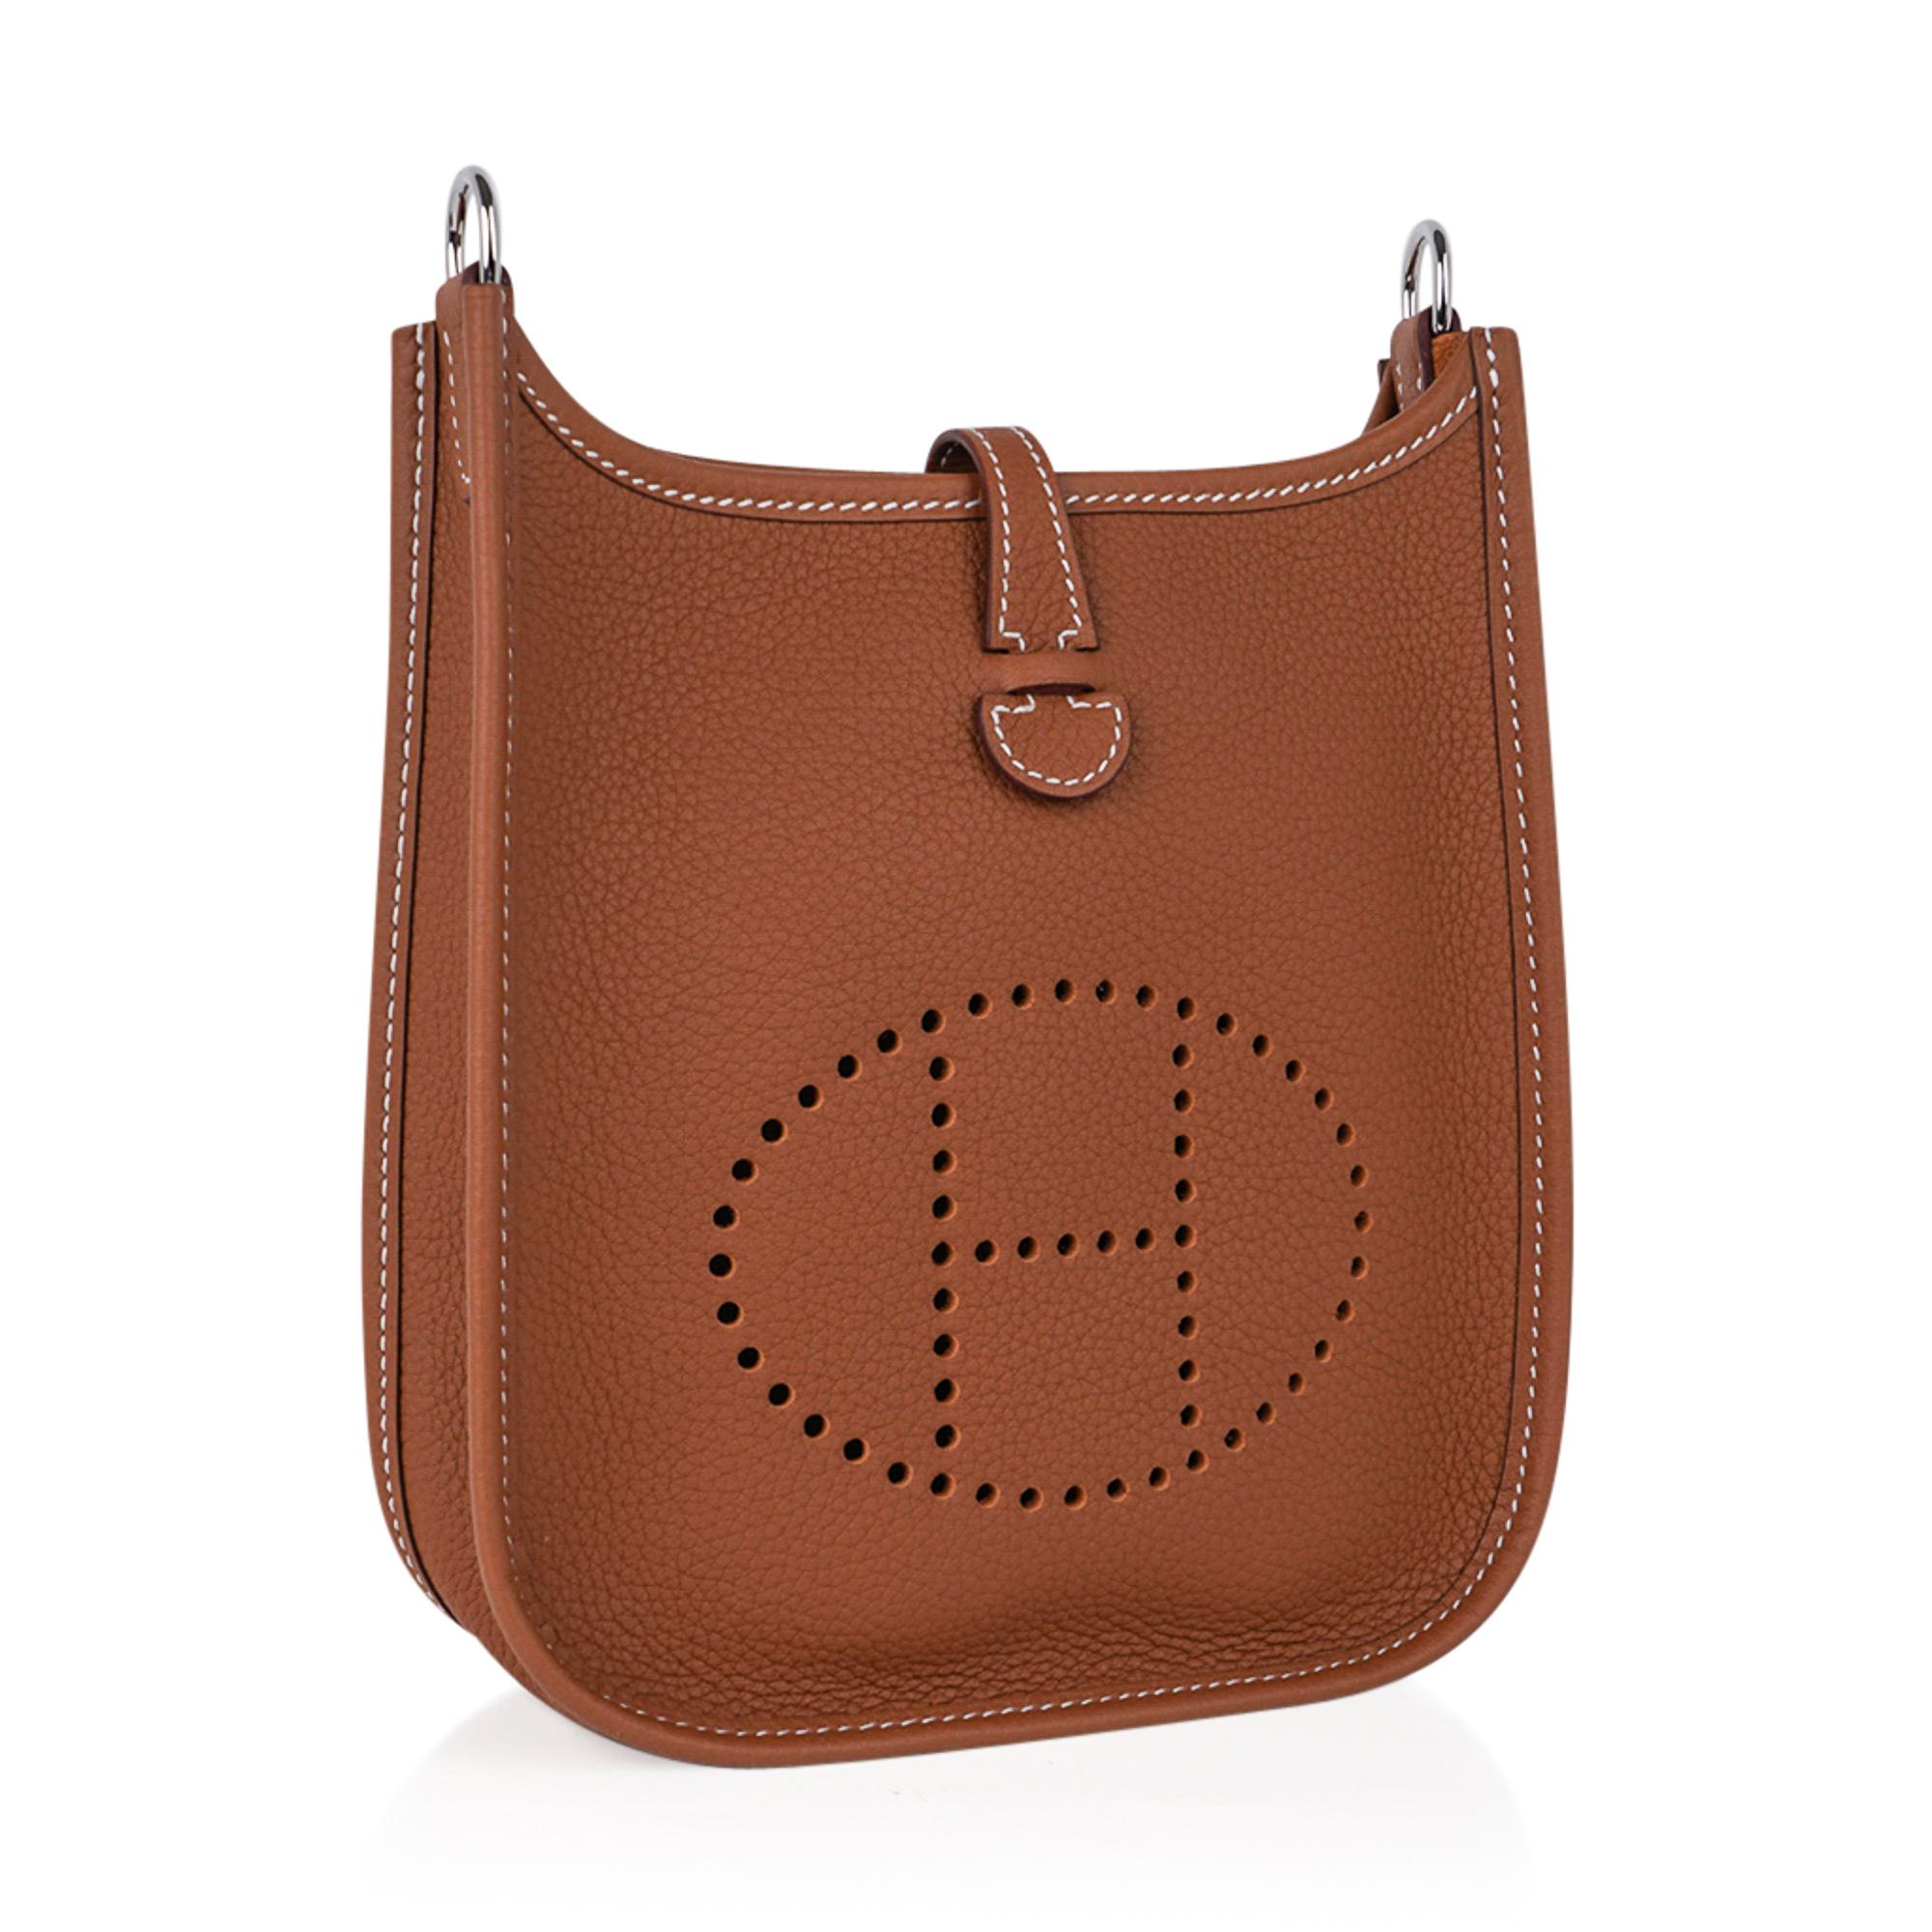 Mightychic offers an Hermes Amazone Evelyne TPM bag featured in classic Gold.  
Taurillon Maurice leather is an alternative to clemence and retains the shape with better hold. 
A beautiful flat small grain.
The Gold and Ecru canvas body strap is a